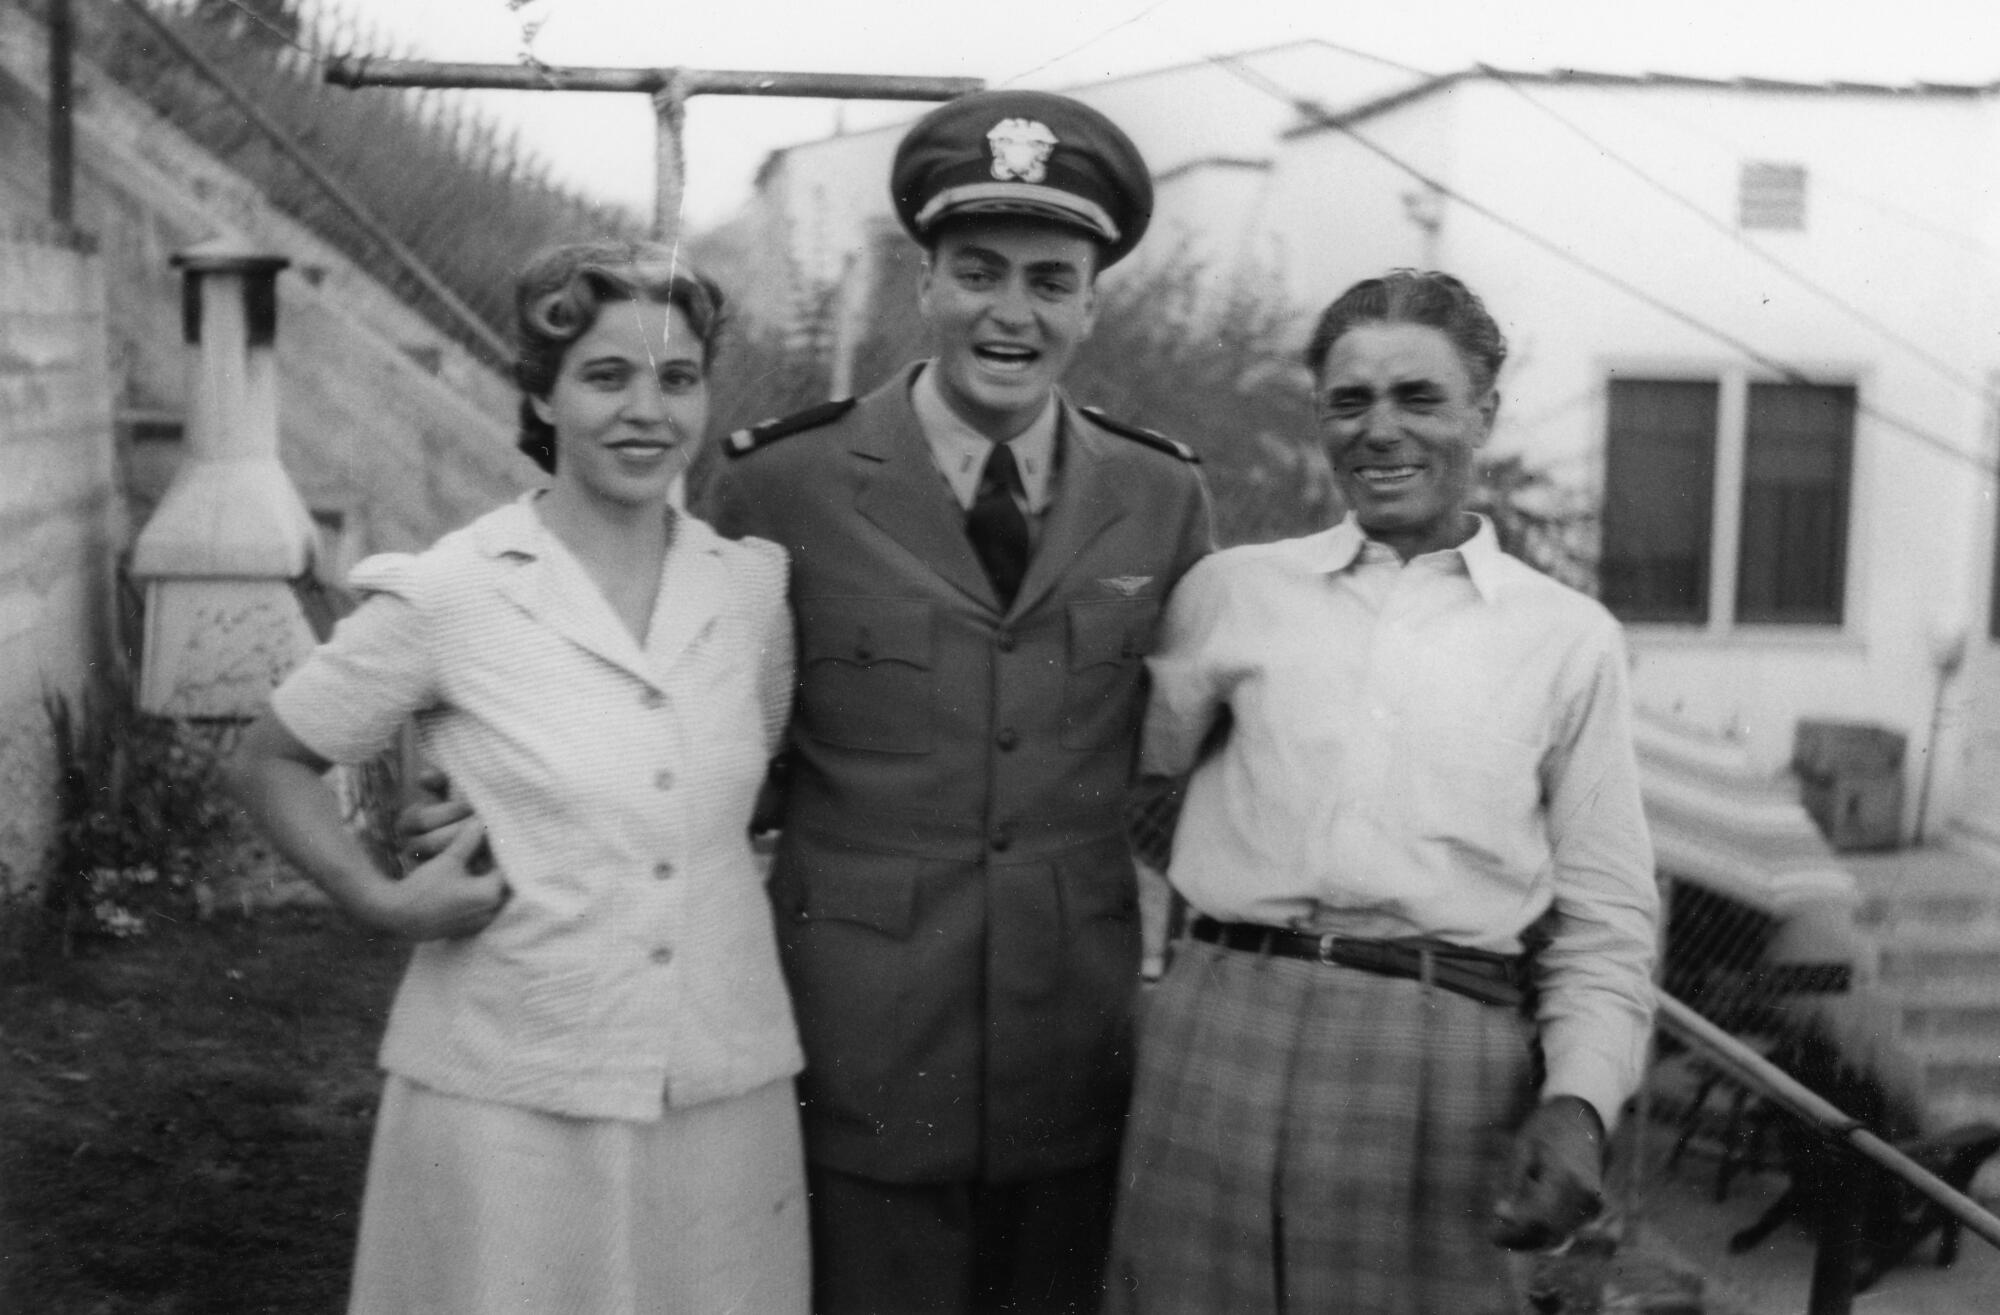 Josephine Caruso stands with her her son, Hank, and husband Augustine in the early 1940s